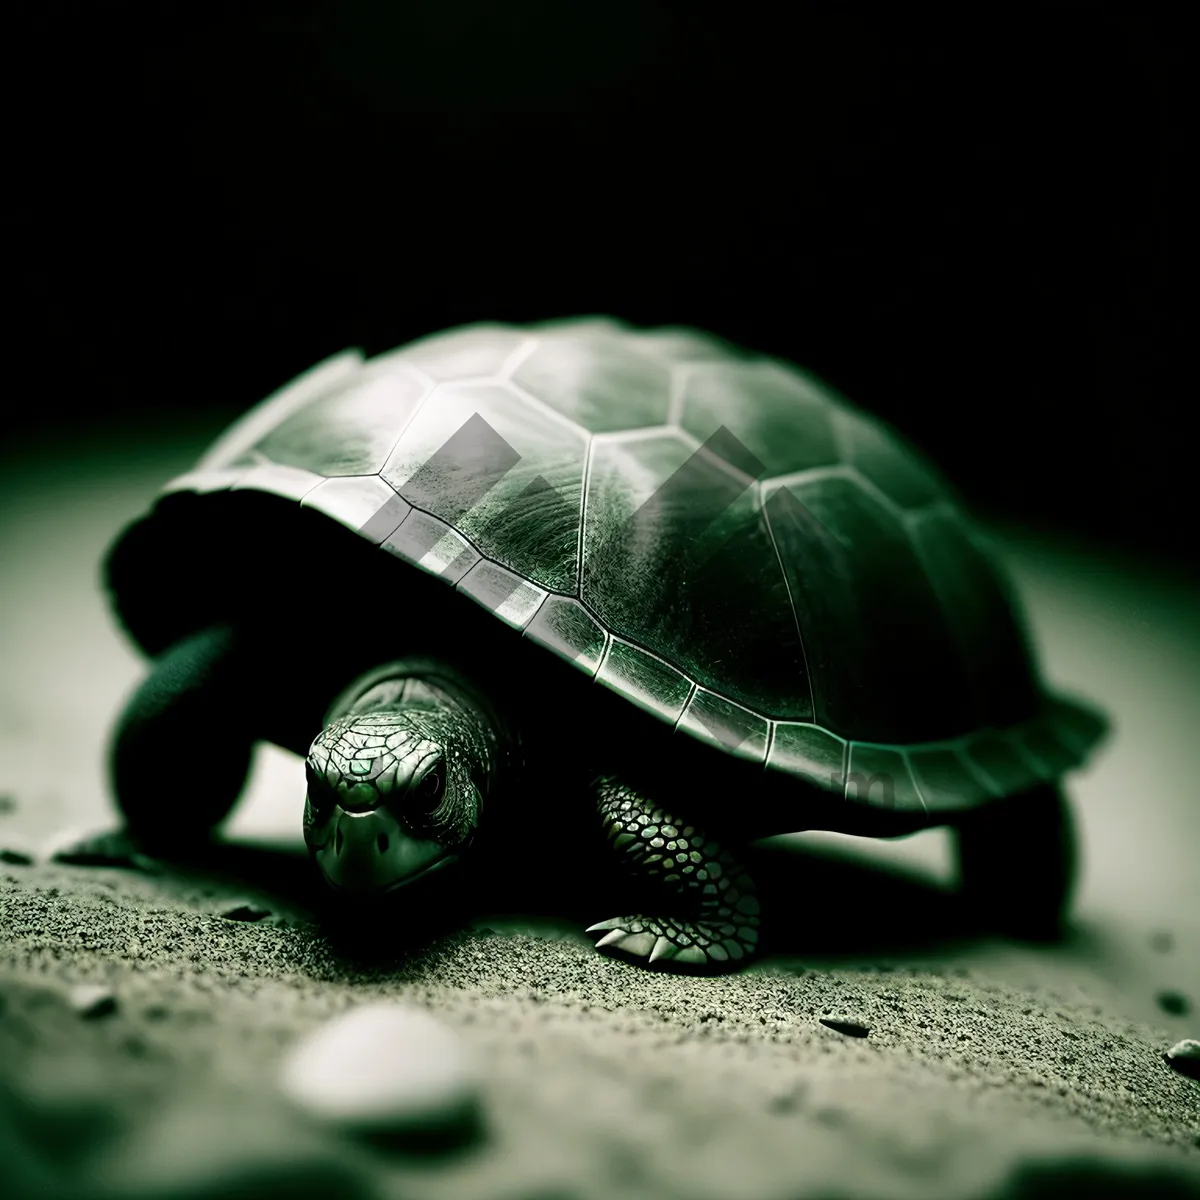 Picture of Slow and steady: Turtle and snail in close proximity.